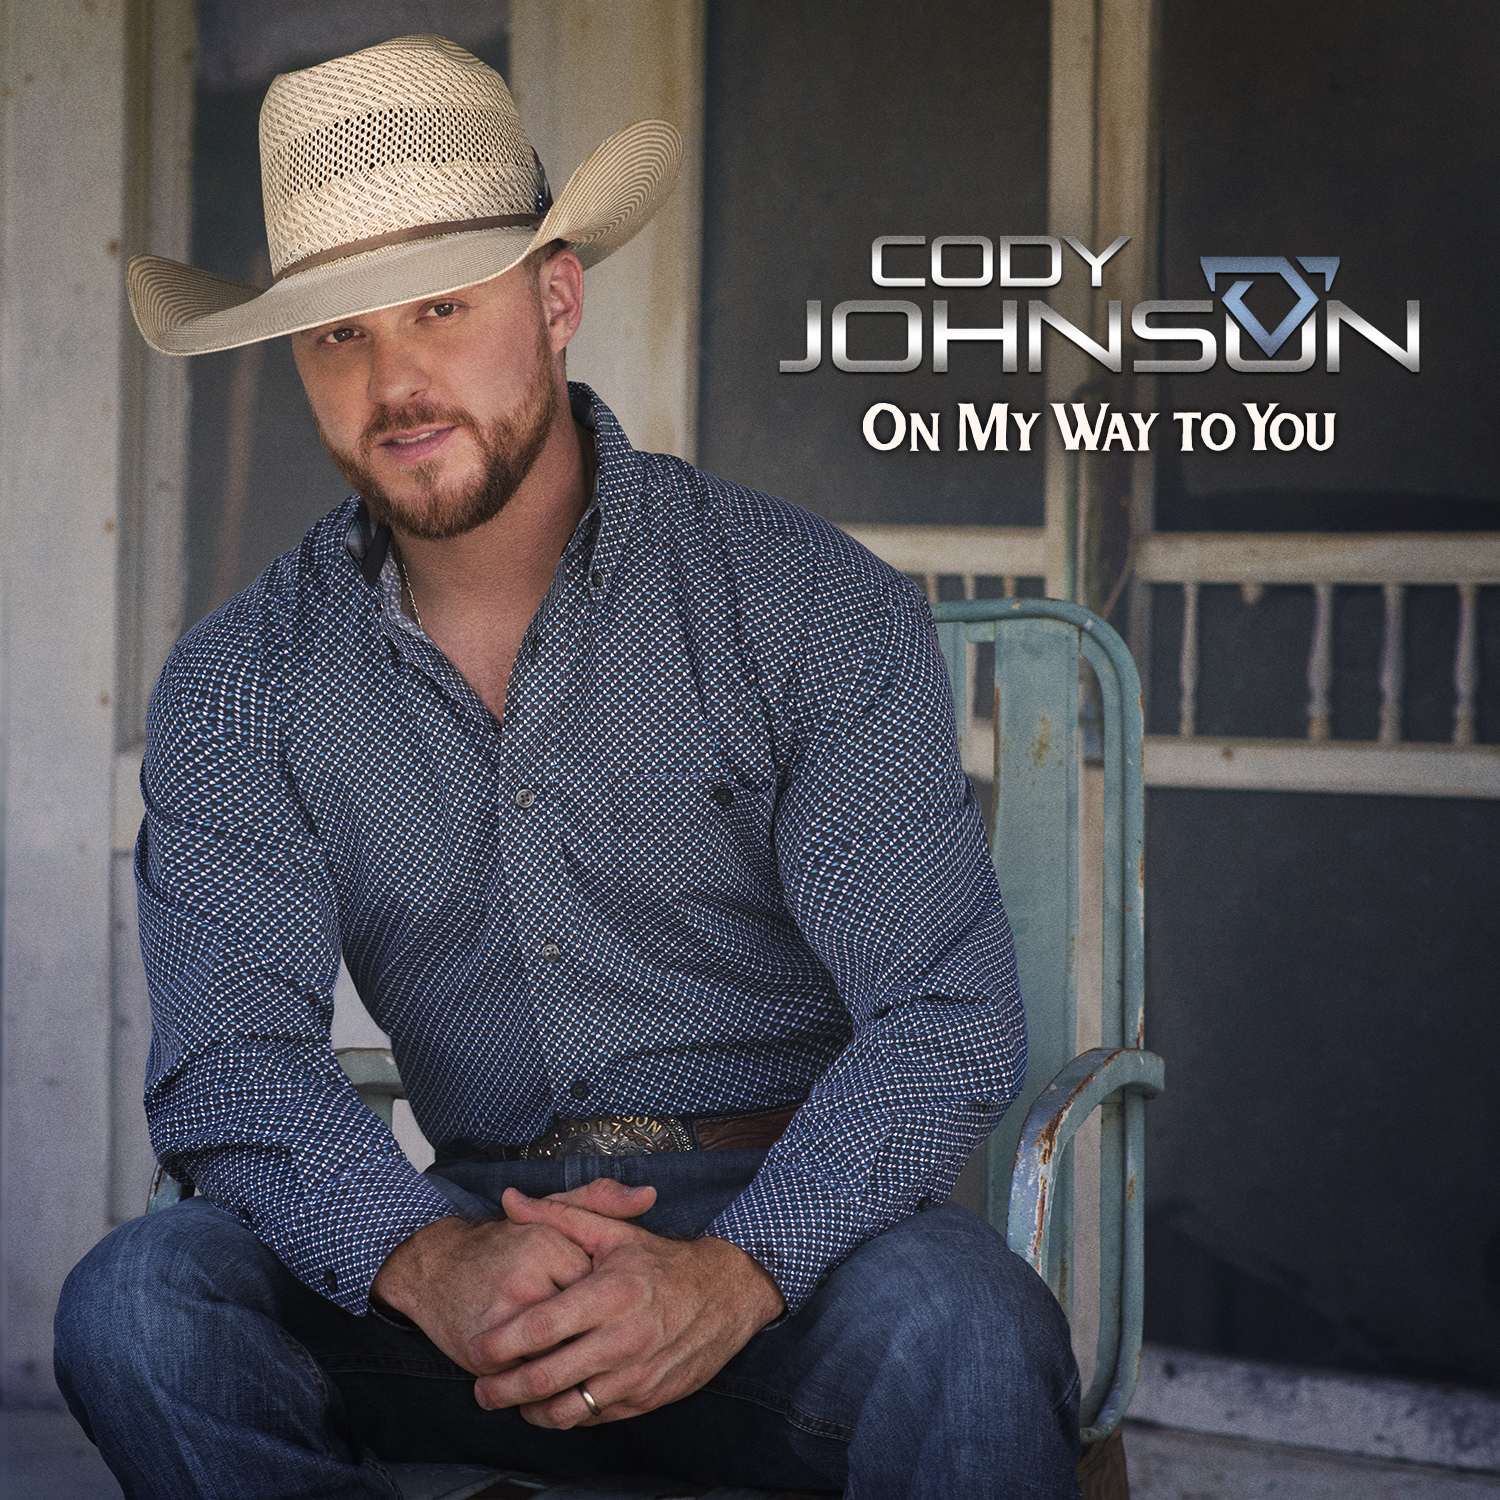 Cody Johnson - On My Way to You